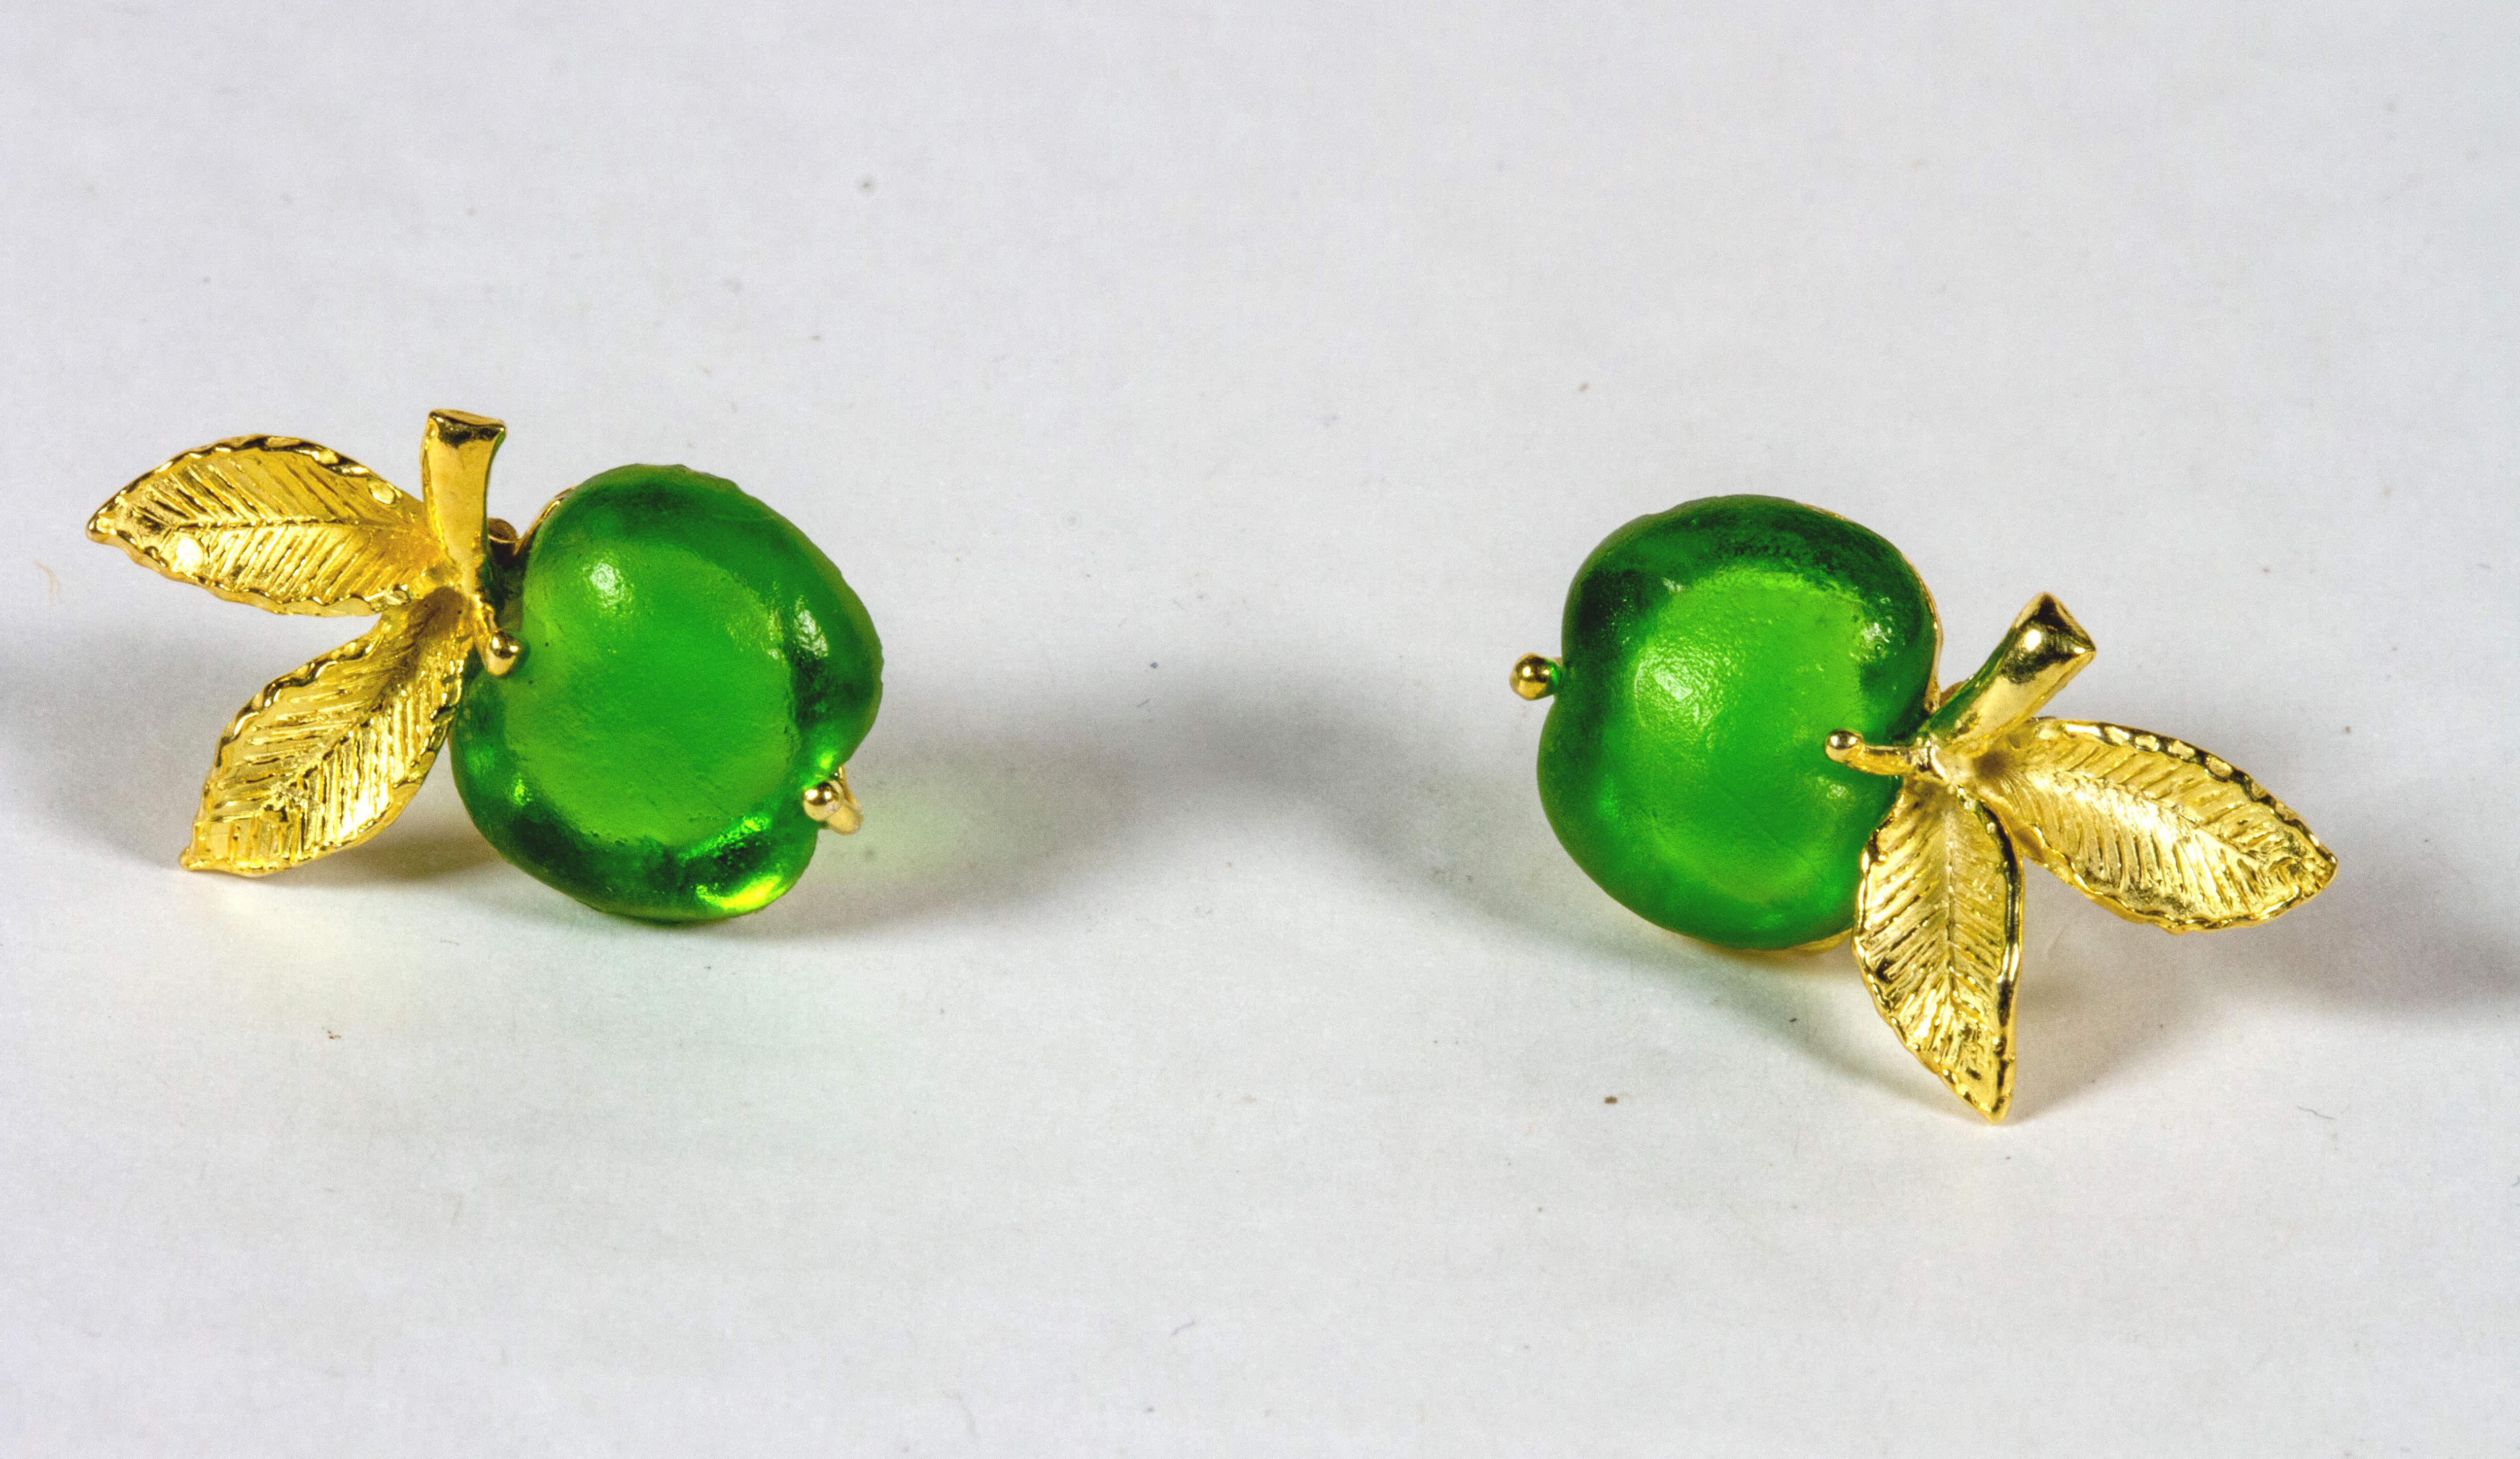 Original earrings in gilded 925 silver with silver leaves and green apple glass paste.
The jewel was made with the 